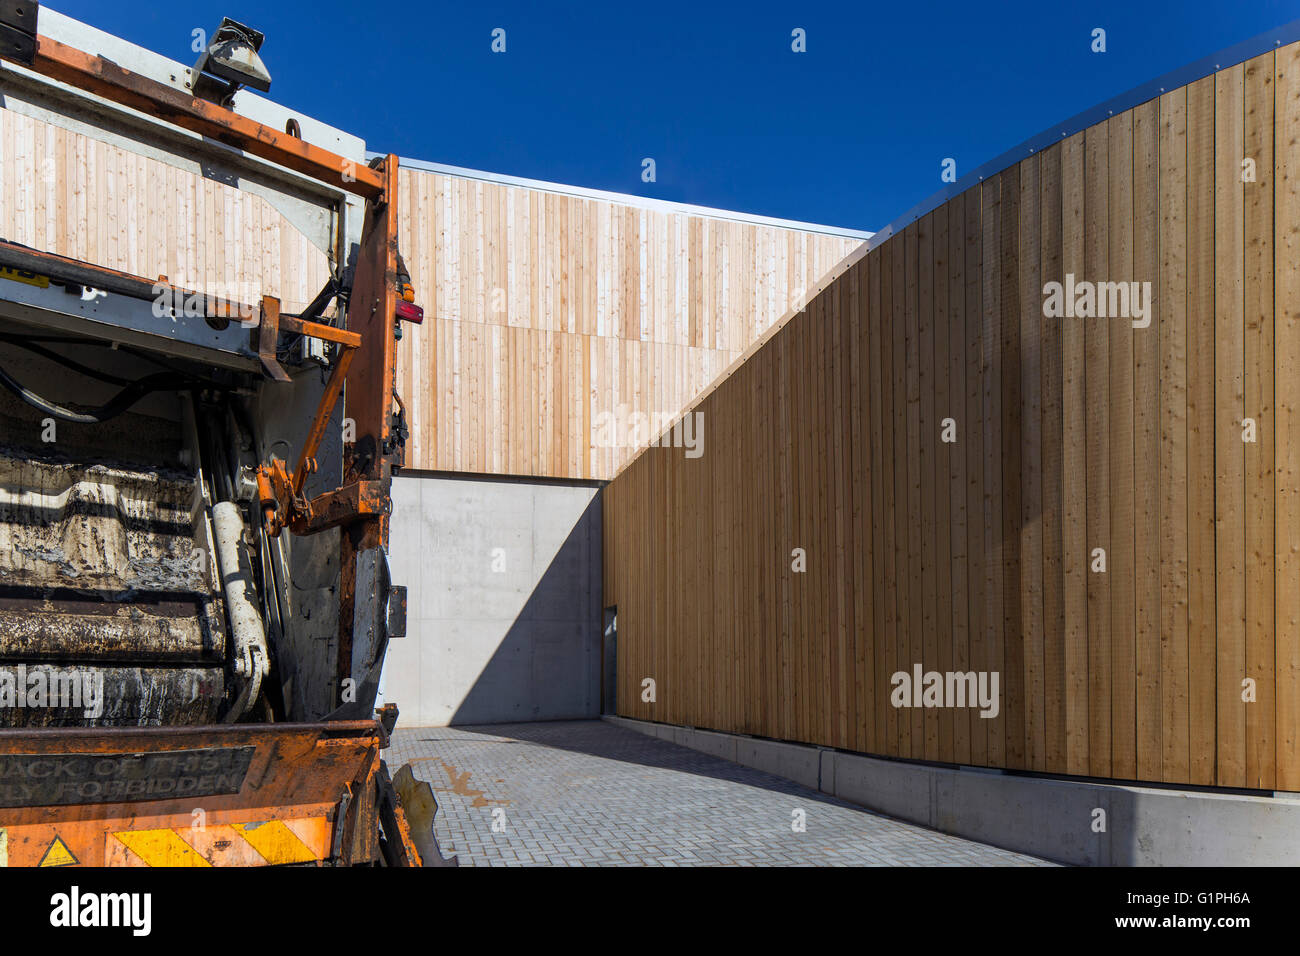 Curved timber cladding of recycling halls and arrival of garbage truck. Bridport Recycling Centre, Bridport, United Kingdom. Architect: Mitchell Eley Gould, 2015. Stock Photo